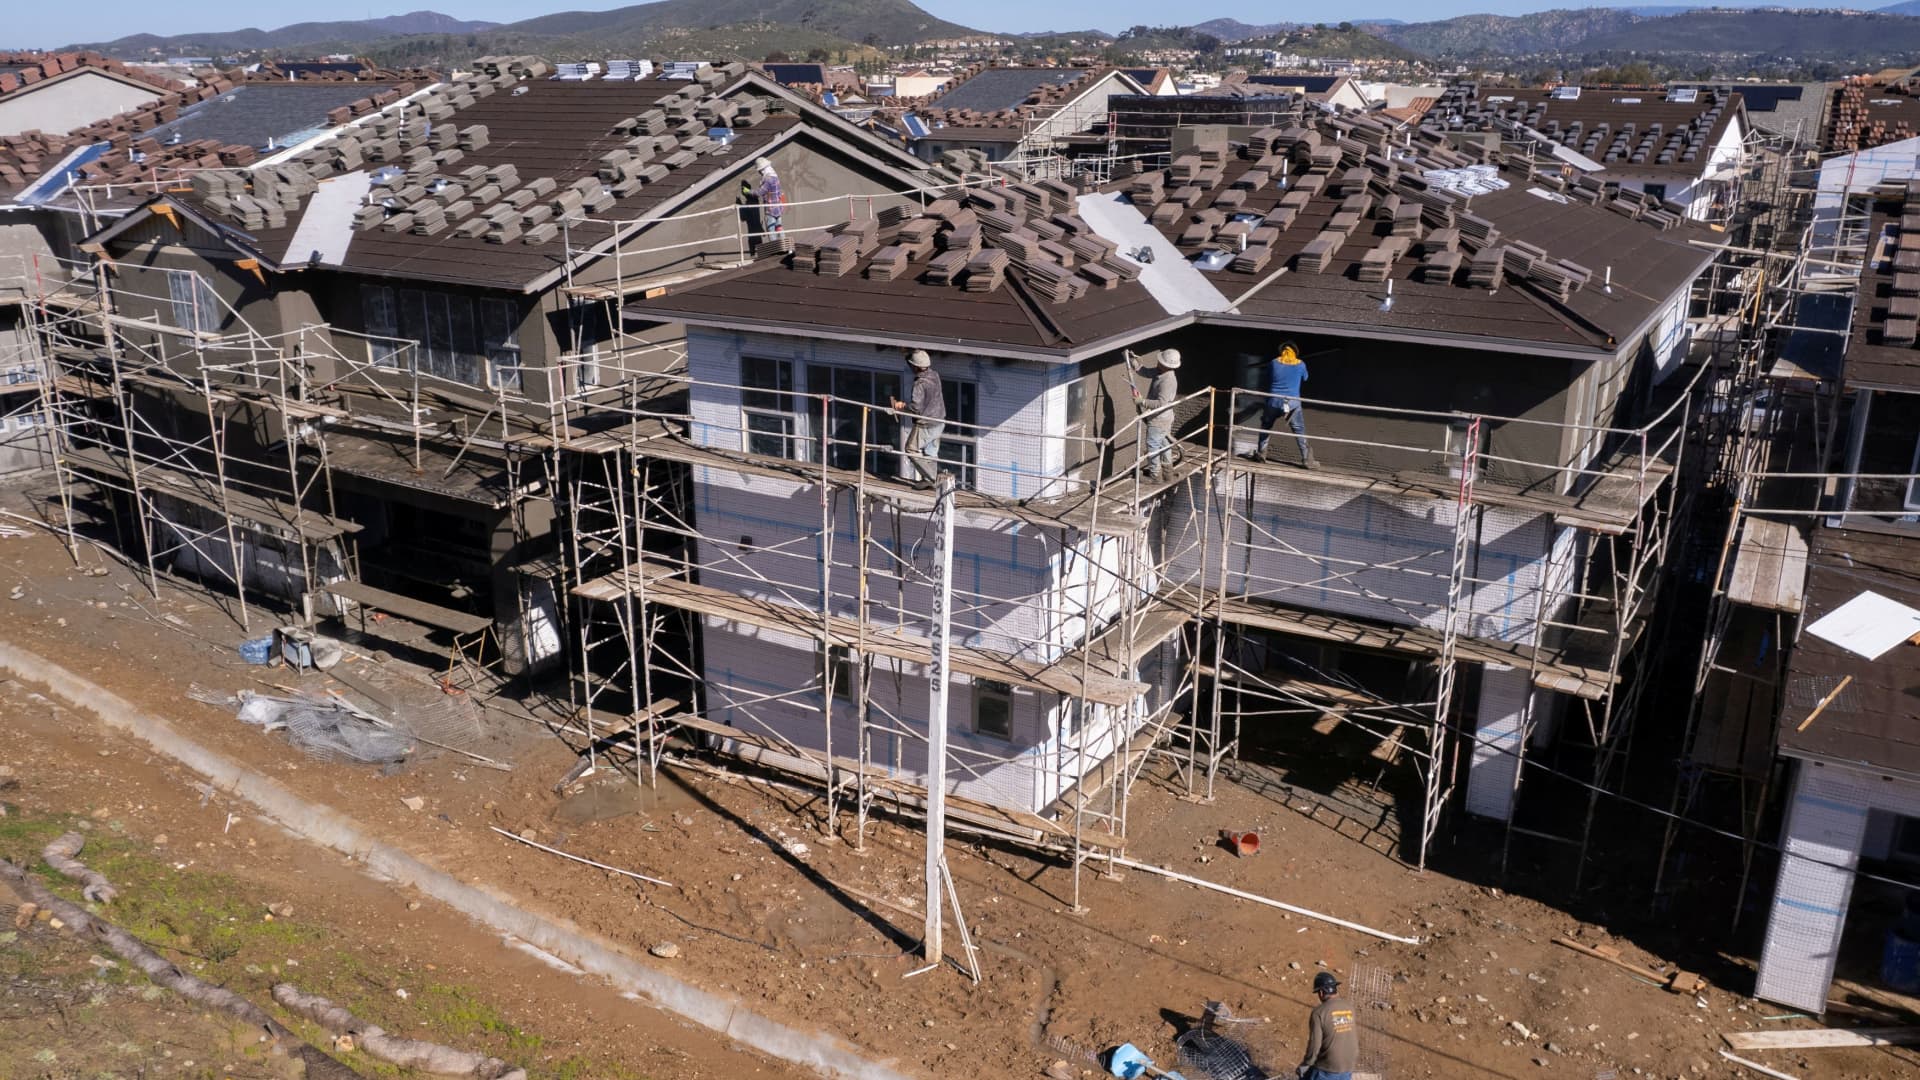 Homebuilders say demand is rising, but they're concerned about a banking fallout